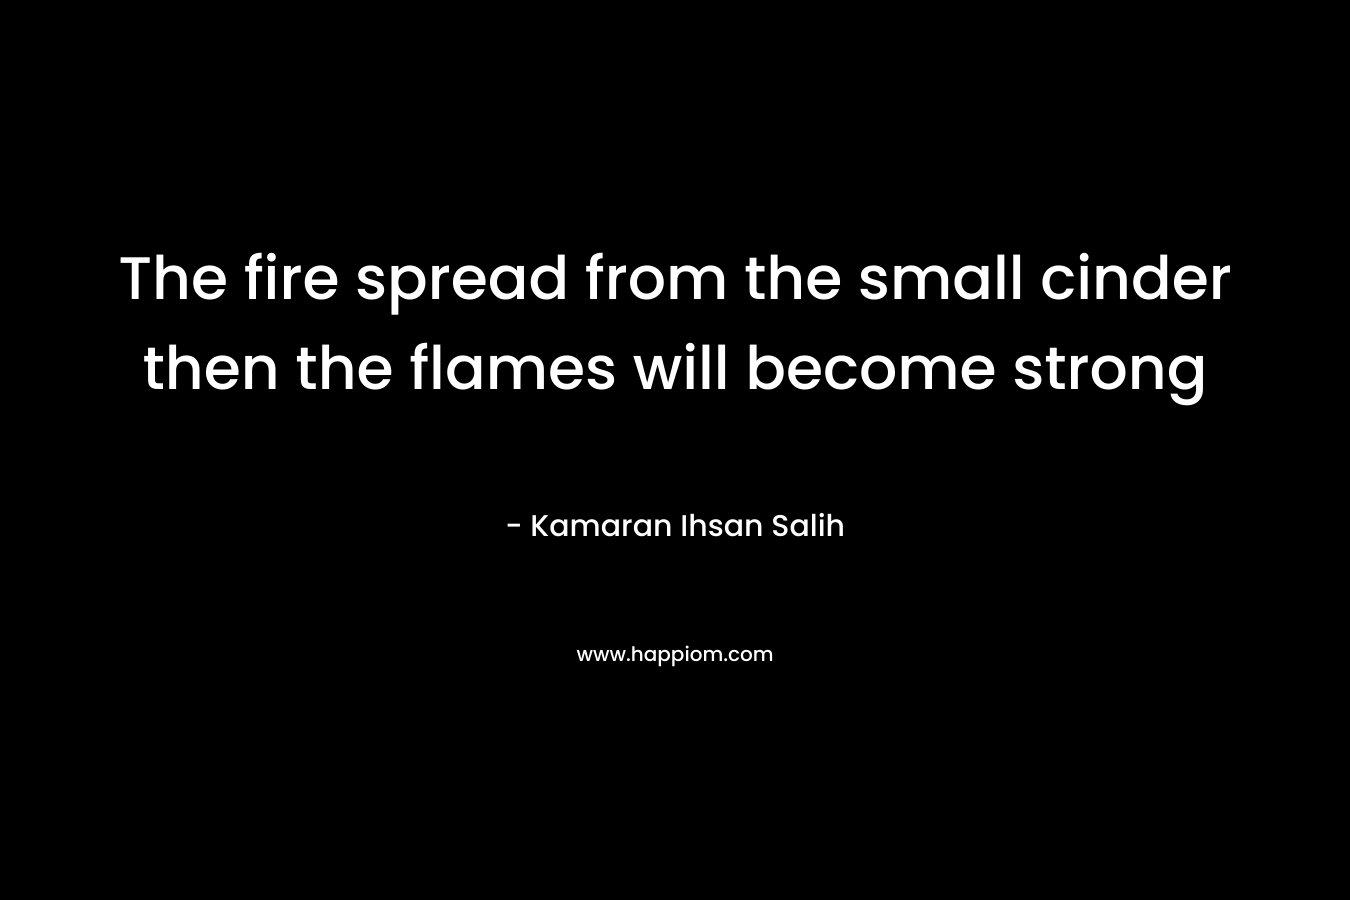 The fire spread from the small cinder then the flames will become strong – Kamaran Ihsan Salih